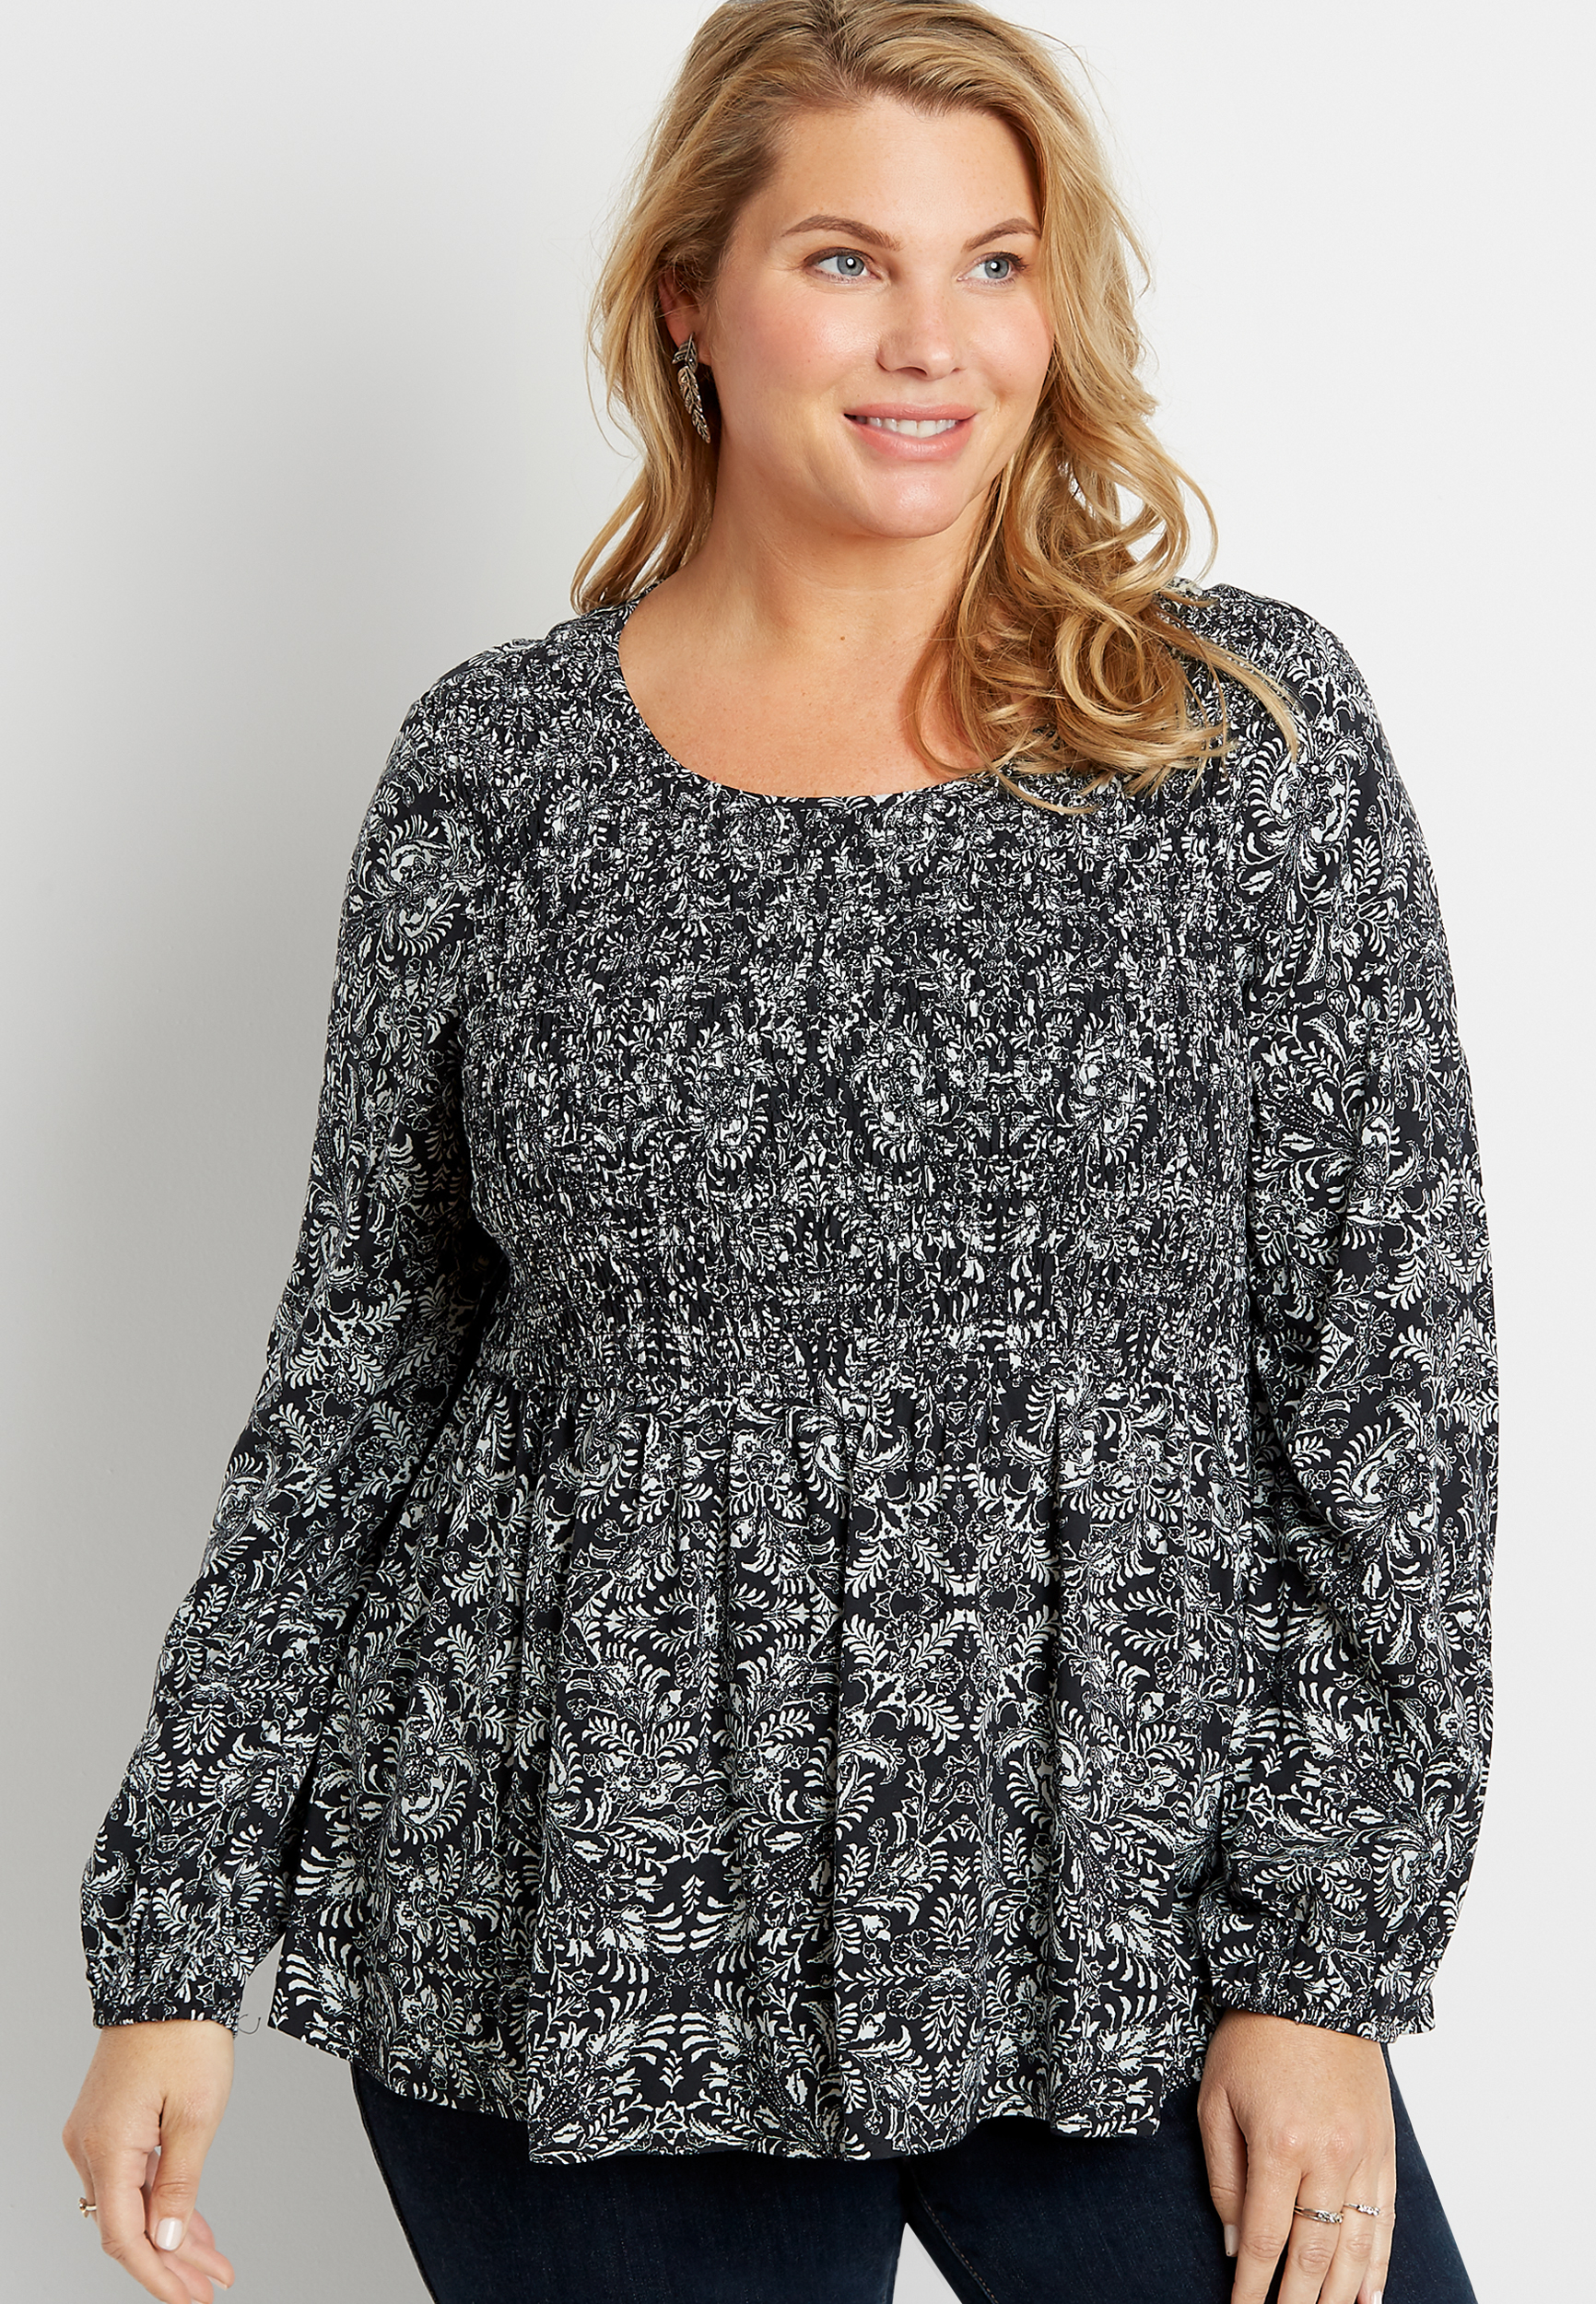 Plus Size Smocked Top Long Sleeve ...